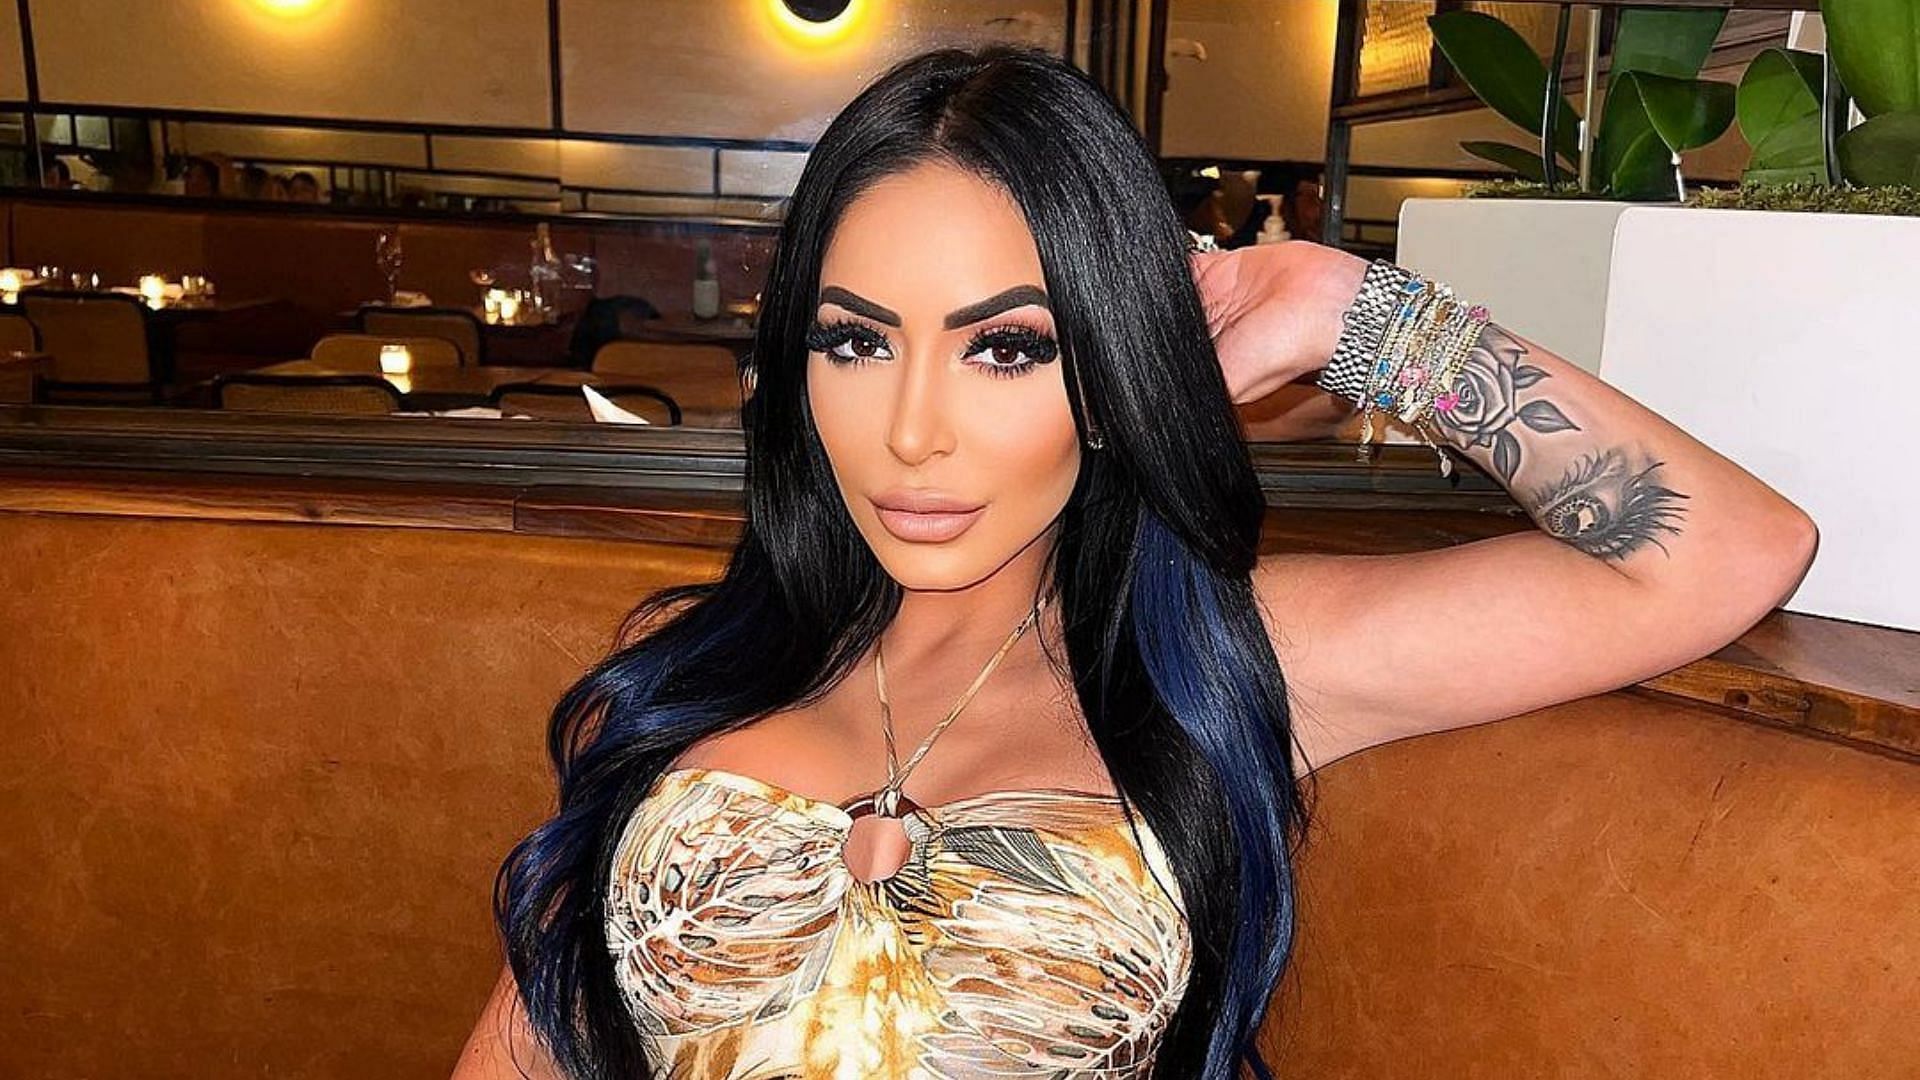 Angelina from Jersey Shore is issuing a challenge for a certain WWE superstar.